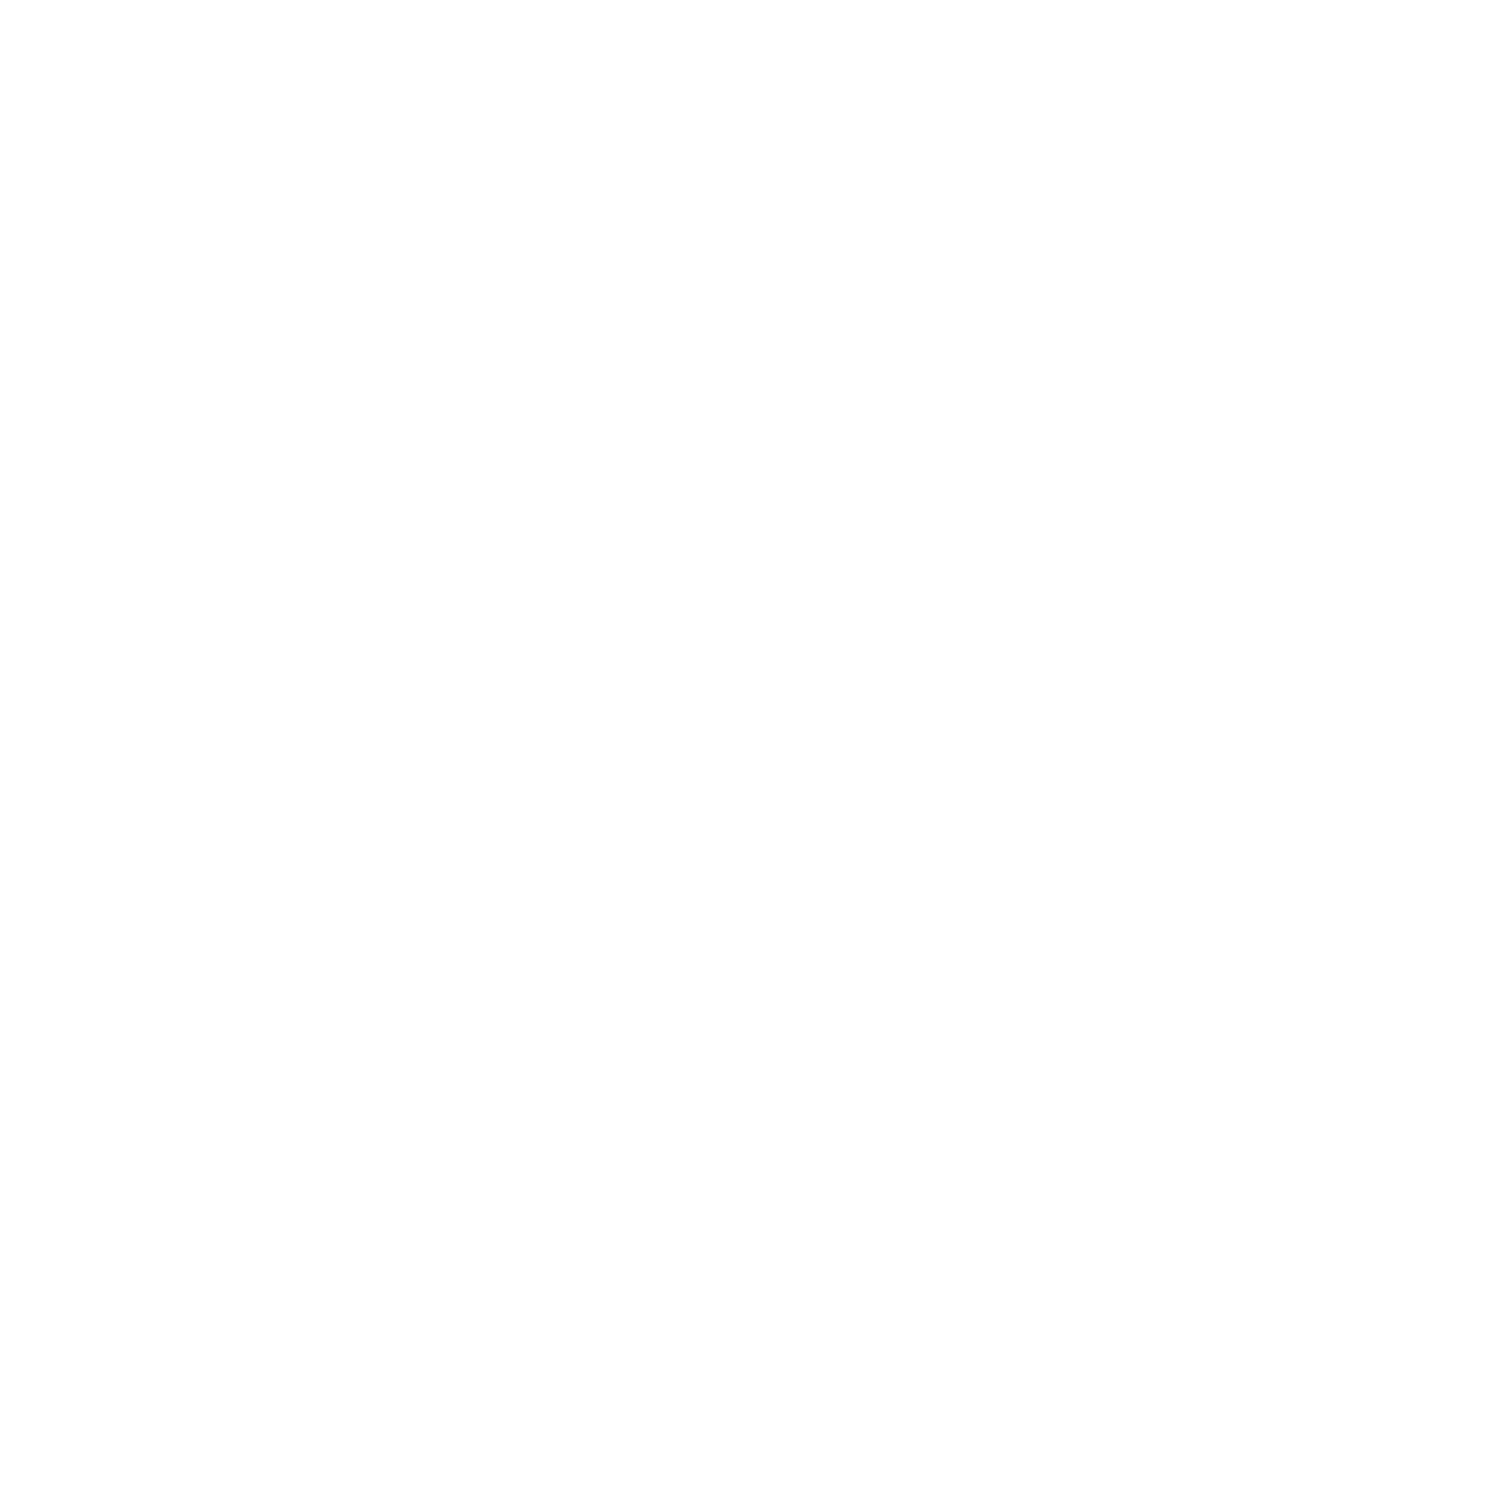 WHIT COMMS